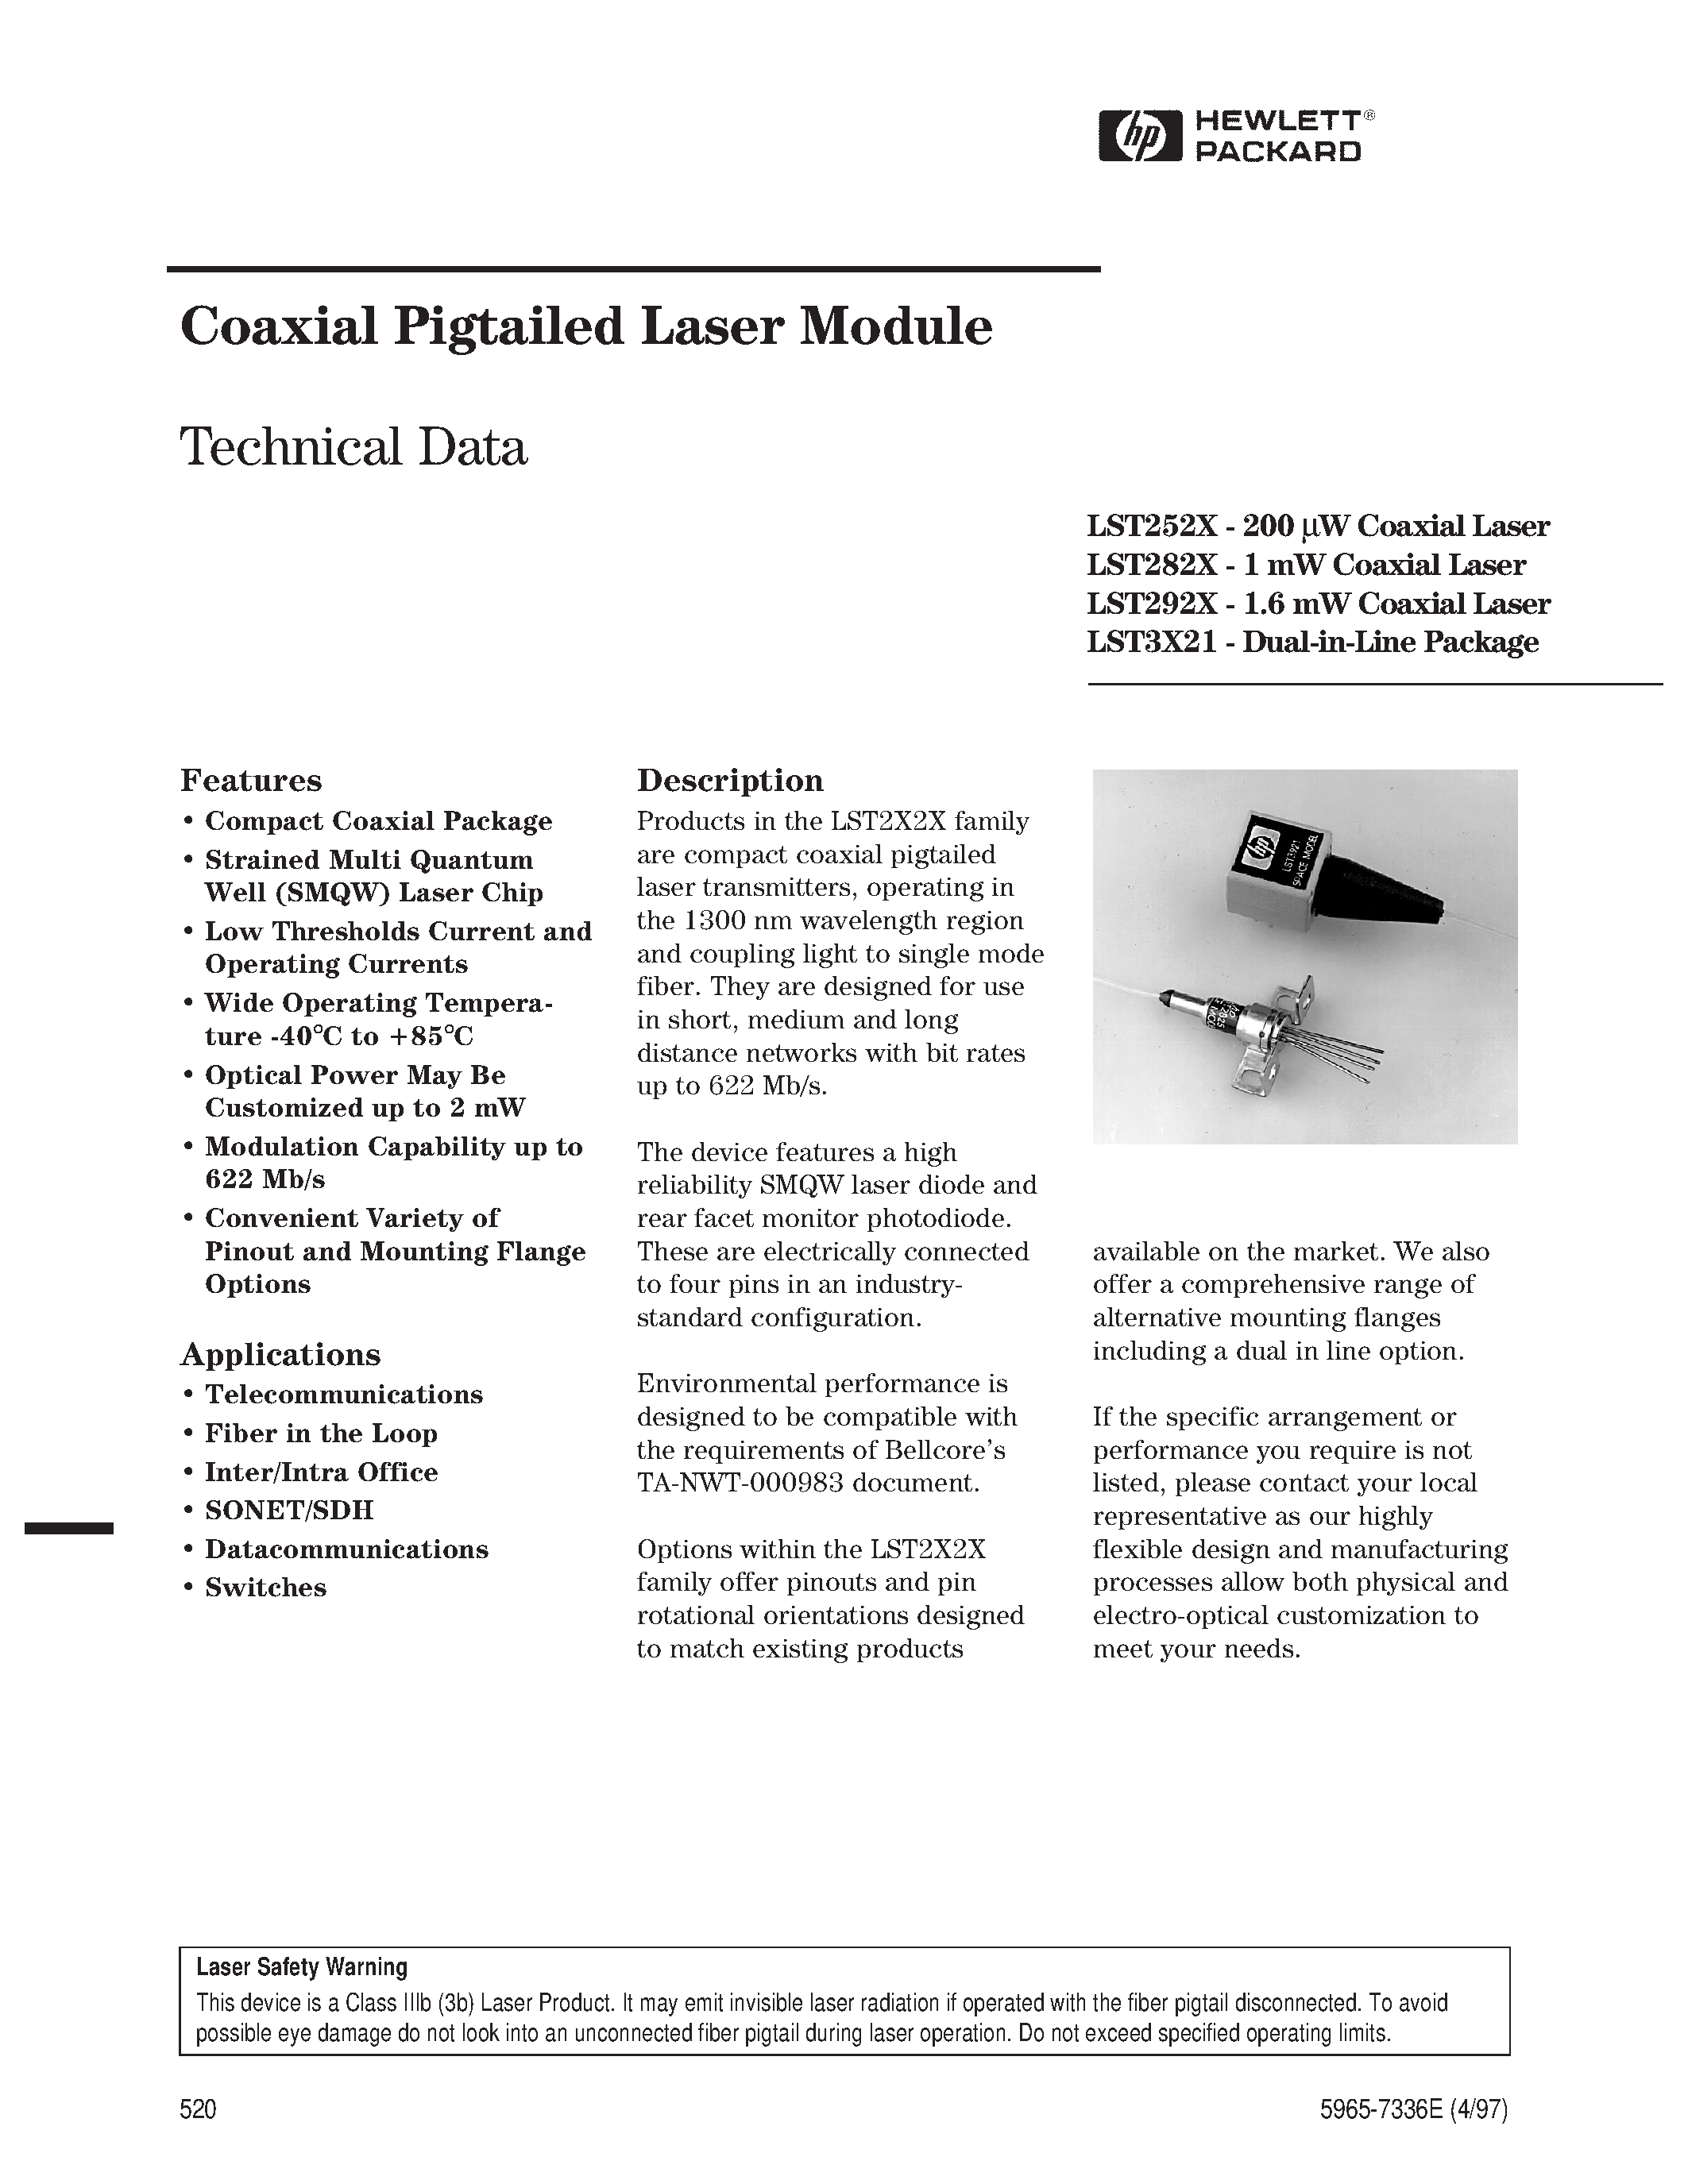 Datasheet LST2925-S4-T-SC - Coaxial Pigtailed Laser Module page 1